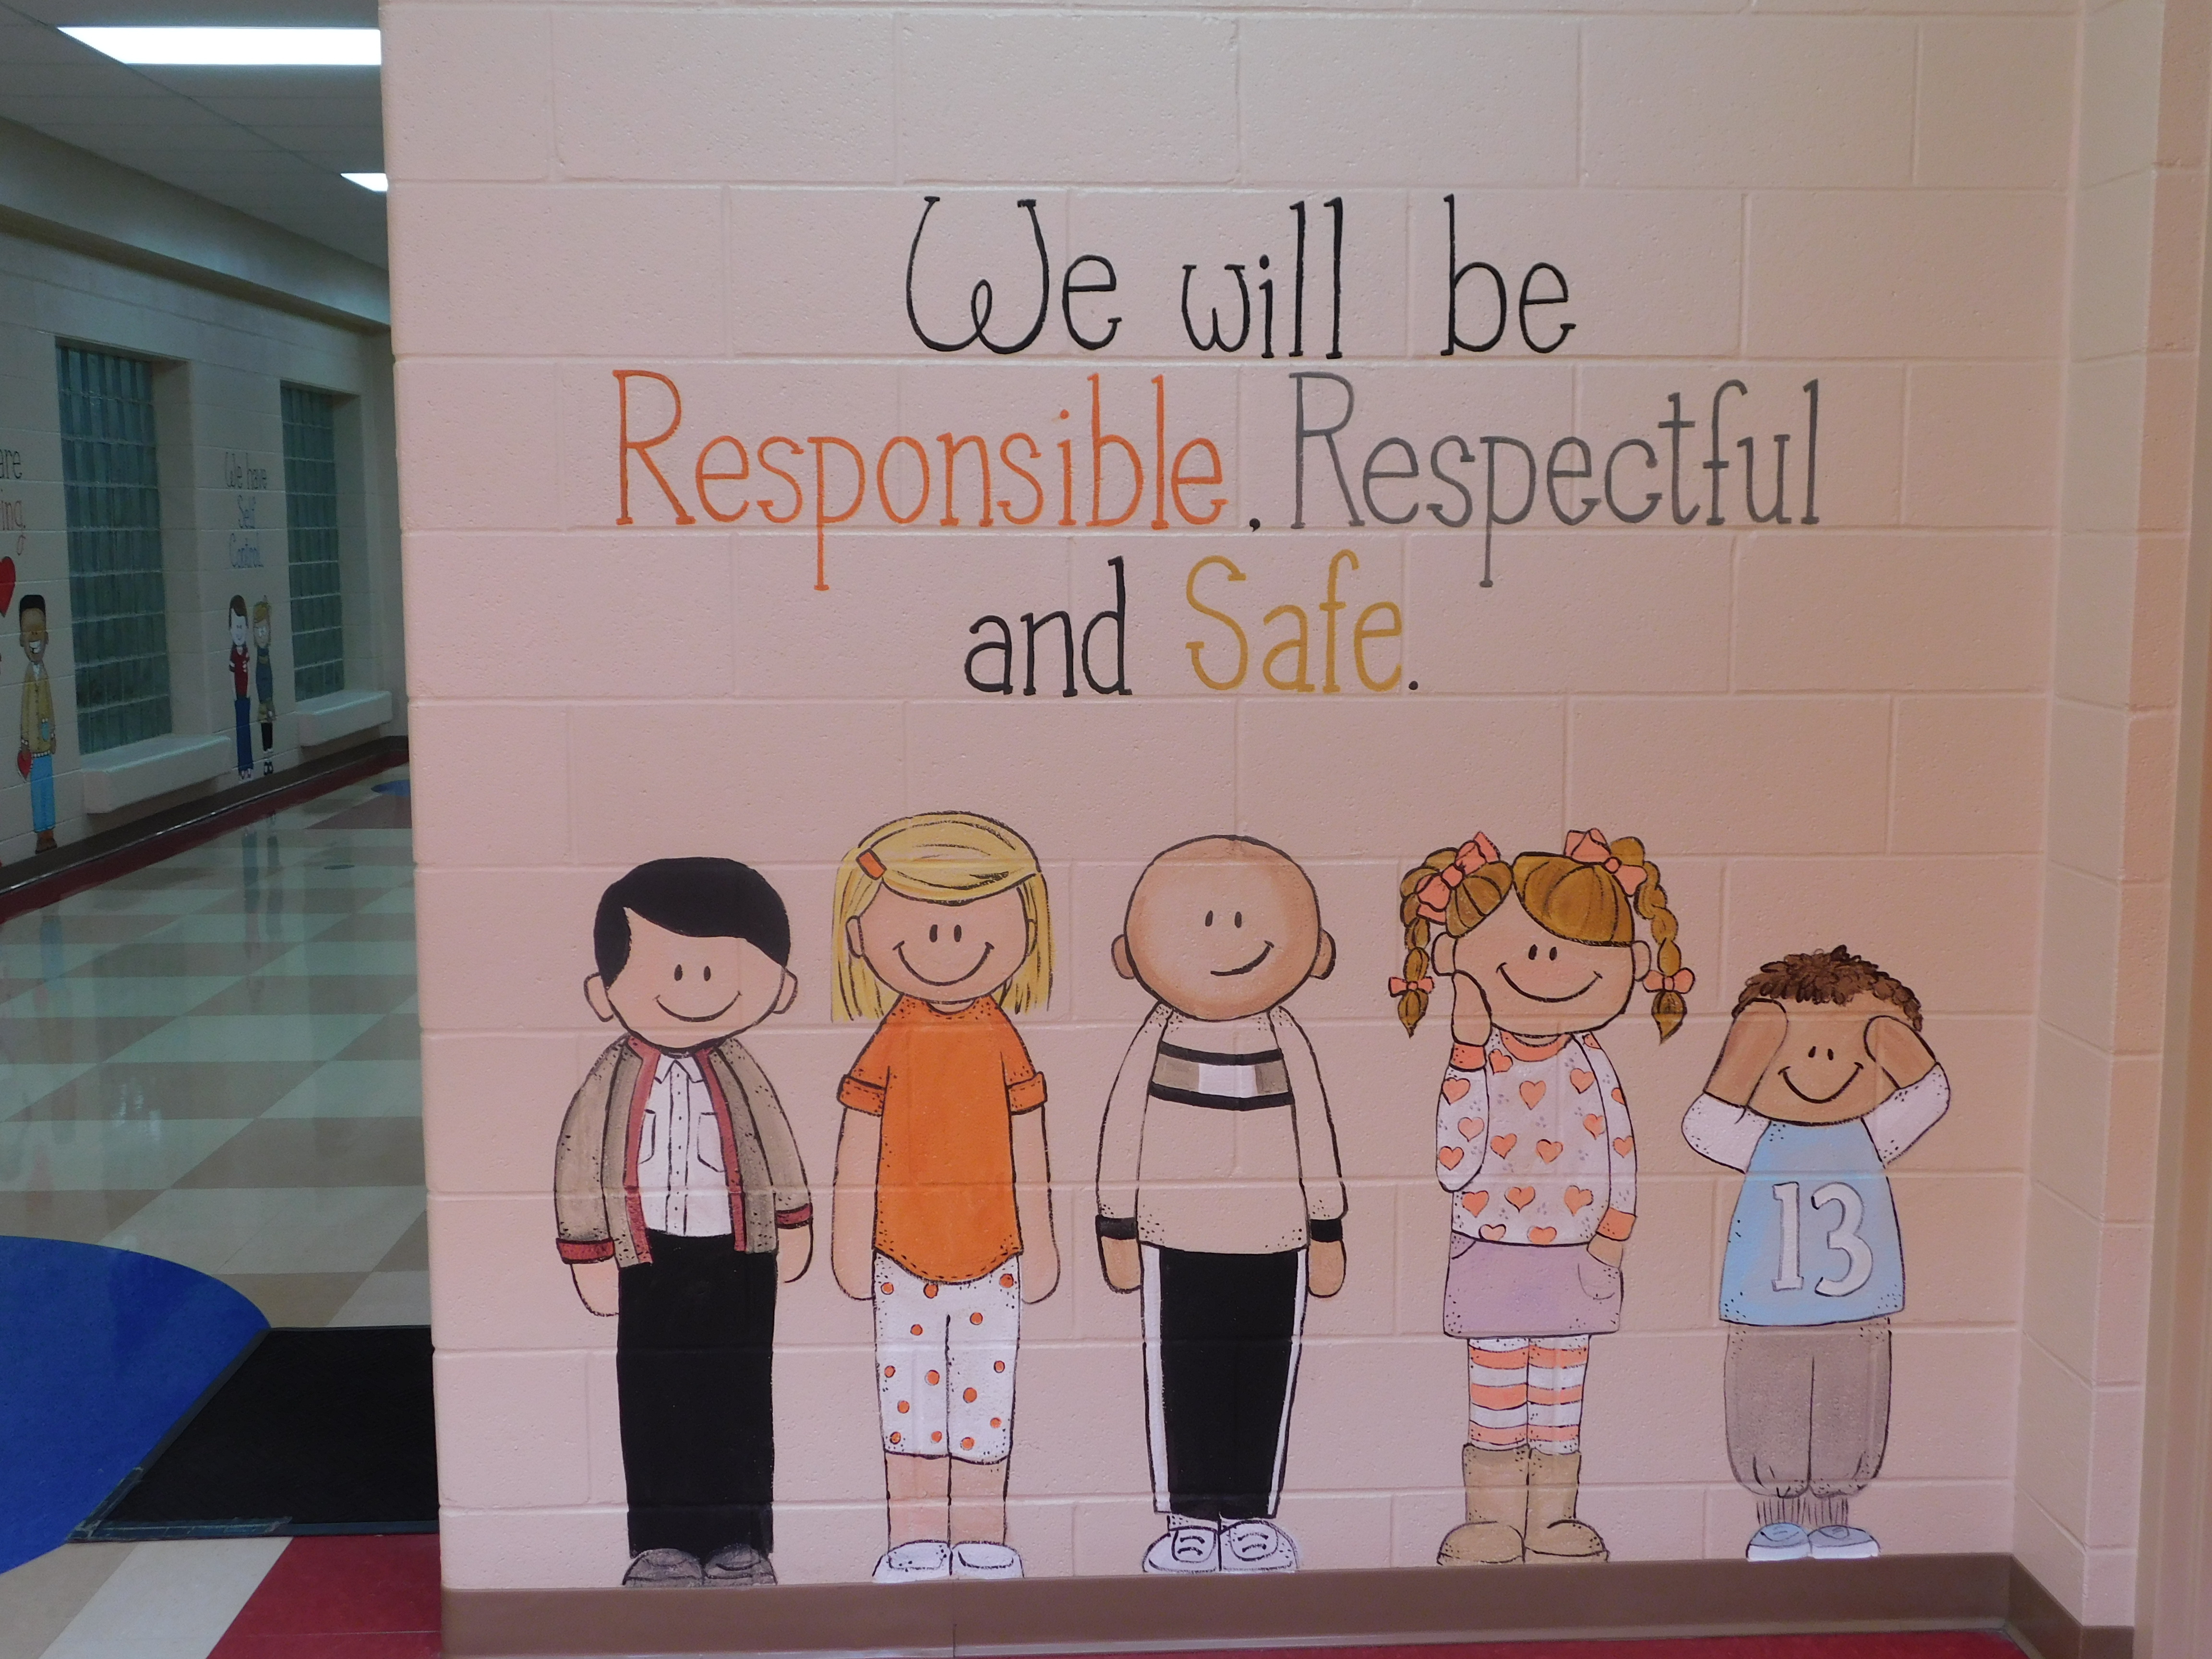 Behavior Expectations: Be Respectful, Responsible and Safe.